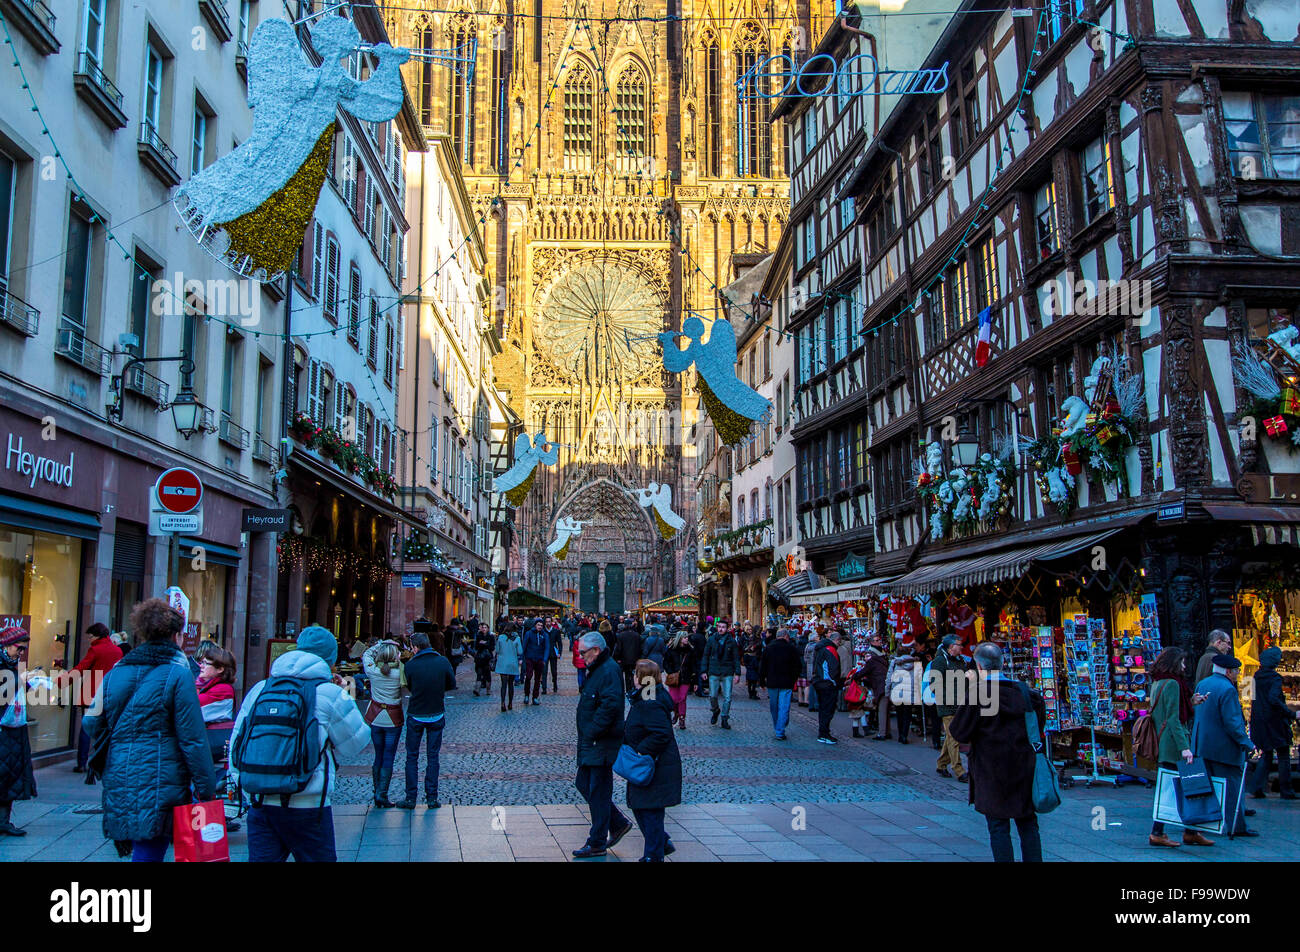 Cathedral of Our Lady, Gothic style church building in the old town area of Strasbourg, Alsace, France Stock Photo